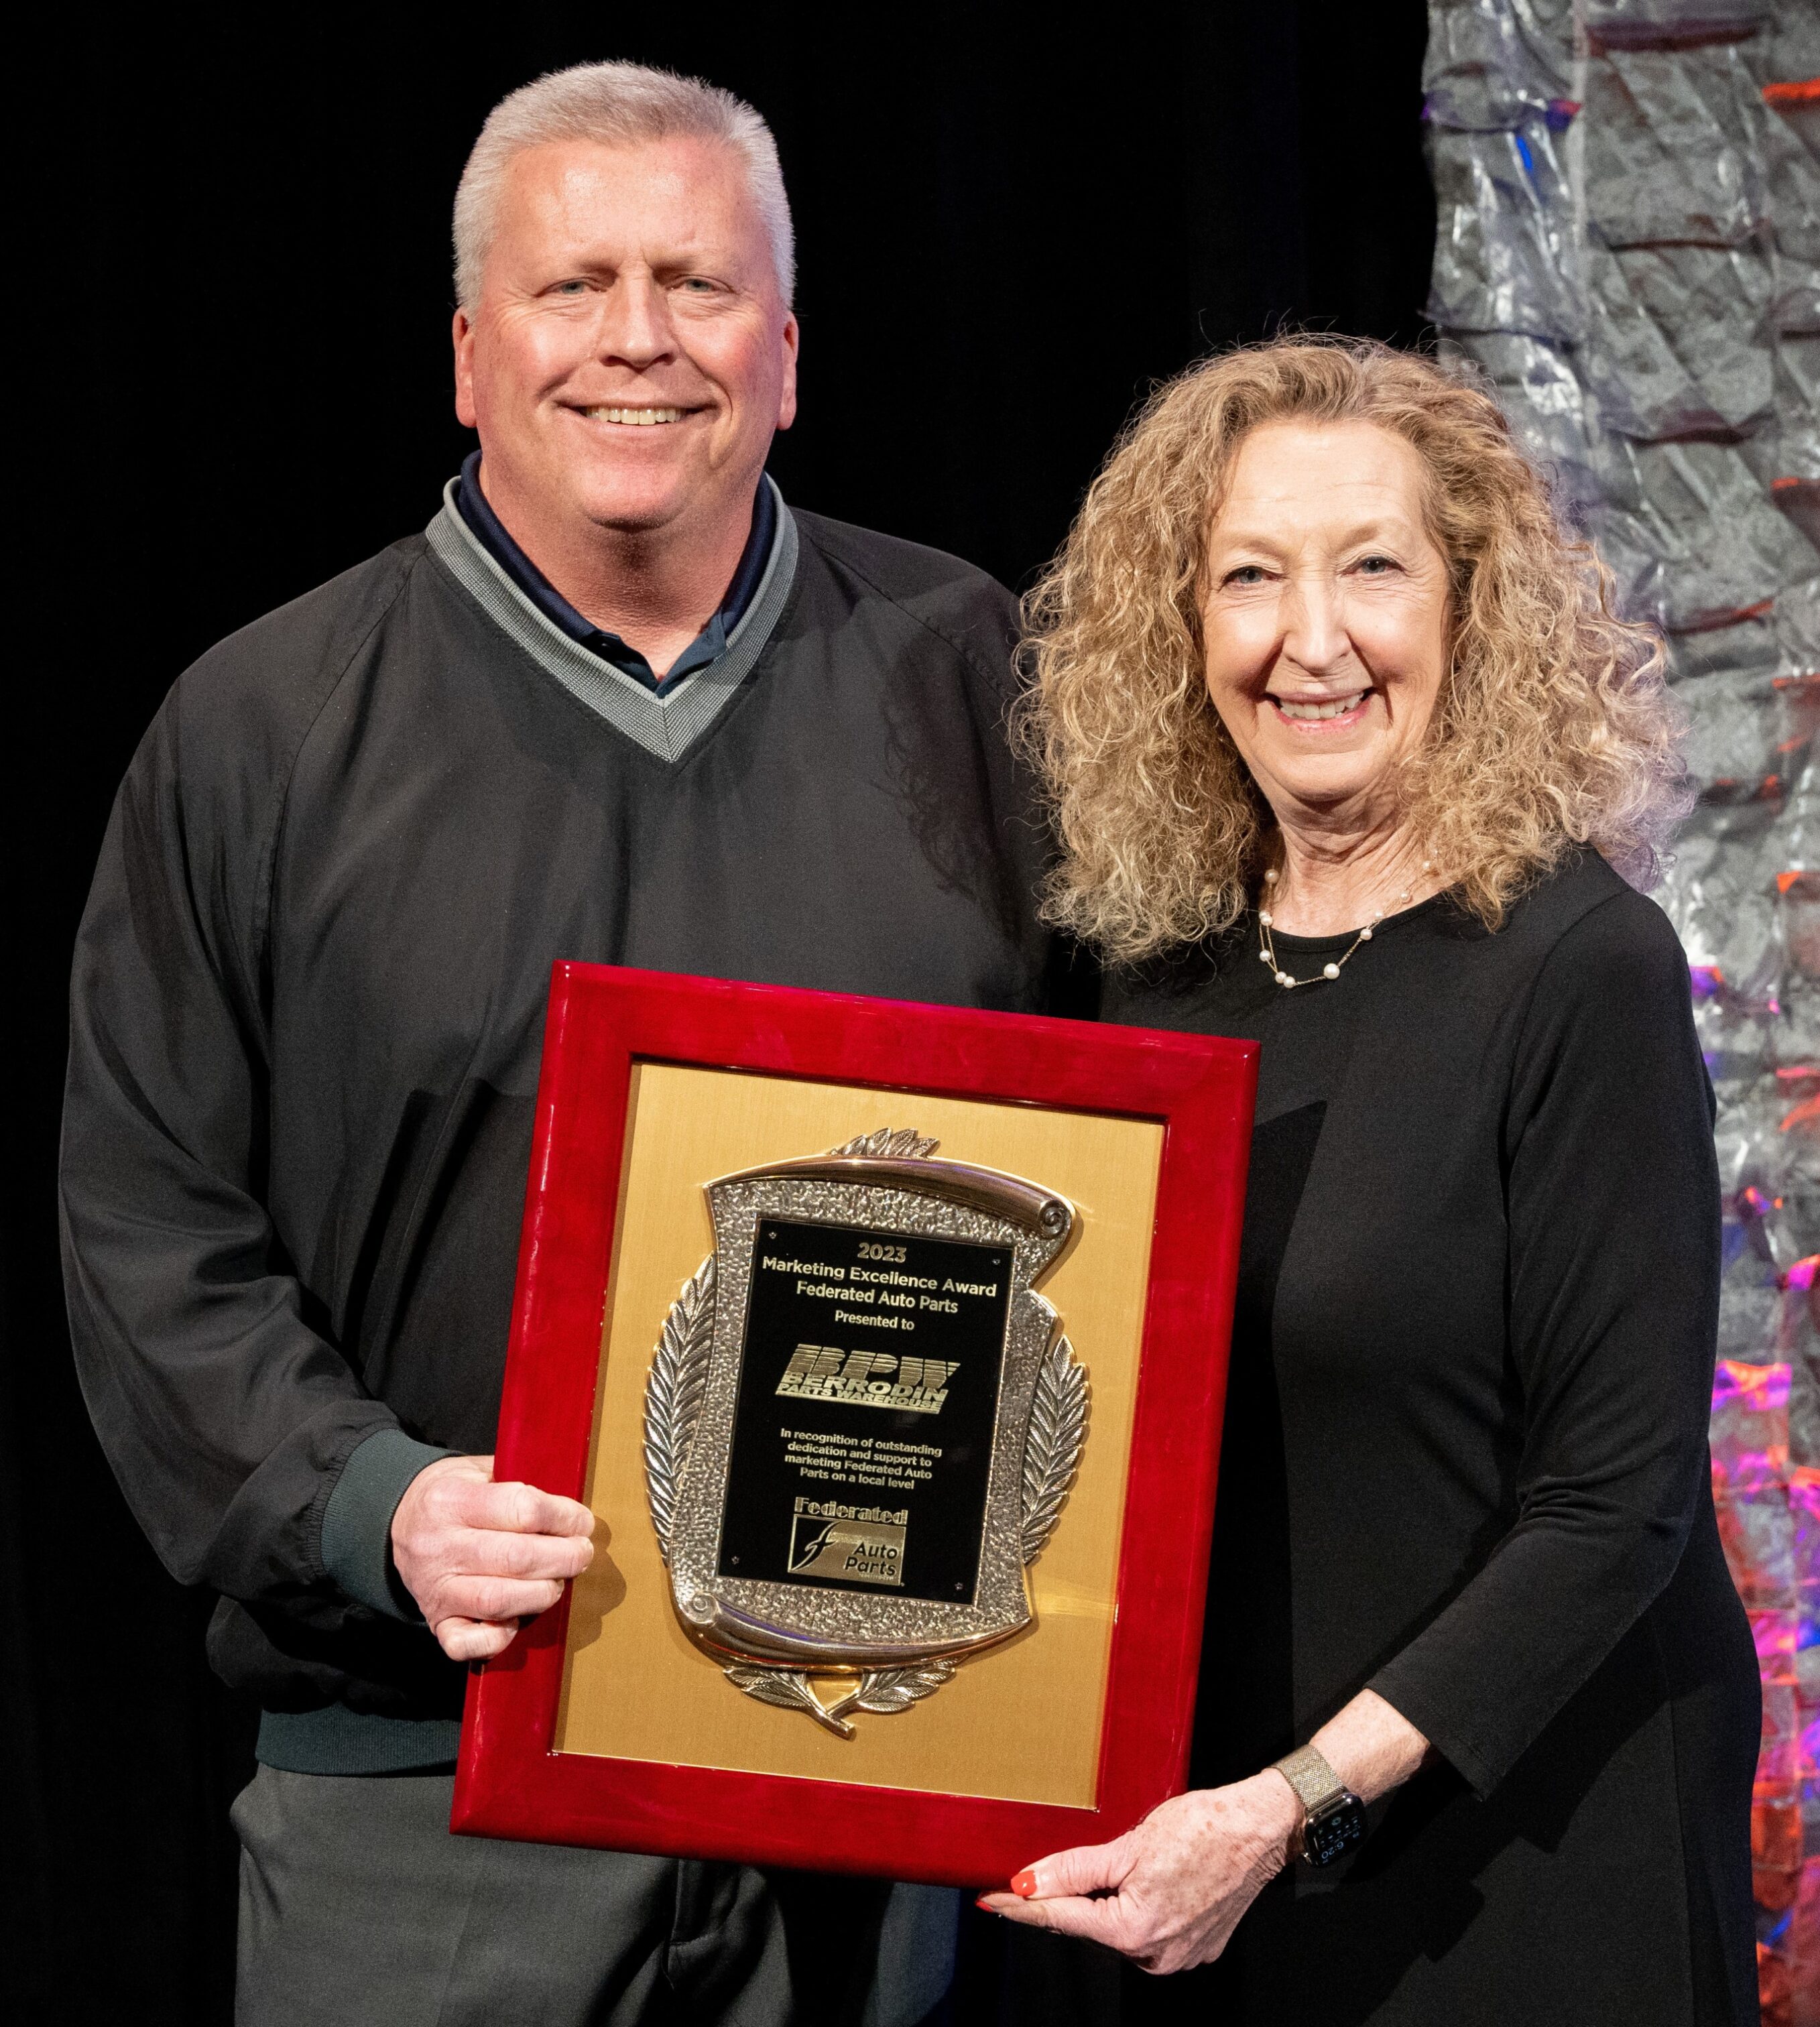 John Berrodin of Berrodin Parts Warehouse was among those presented with awards by Sue Godschalk, president of Federated Auto Parts.